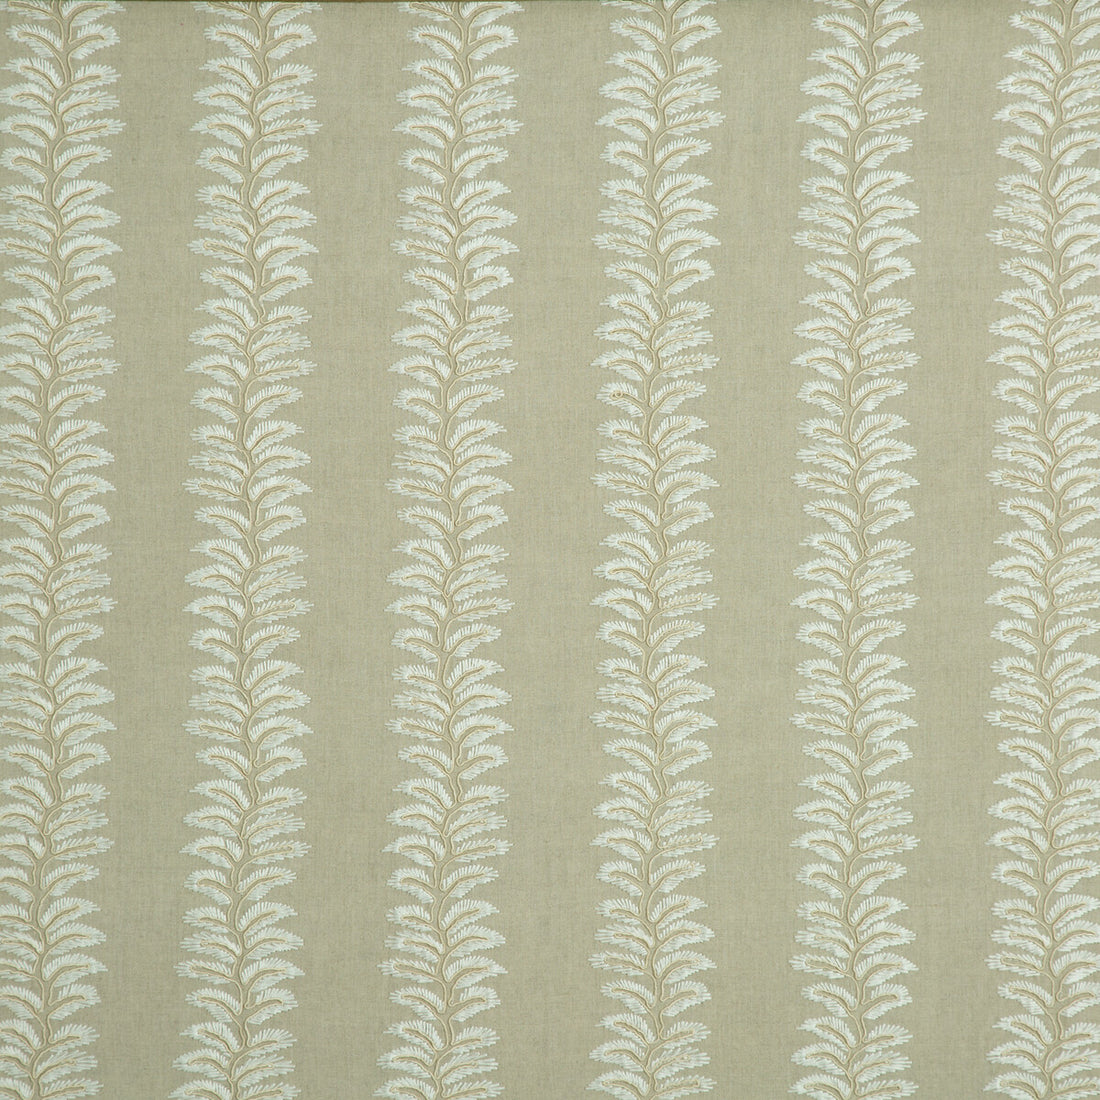 New Bradbourne fabric in linen color - pattern BF10963.110.0 - by G P &amp; J Baker in the Langdale collection